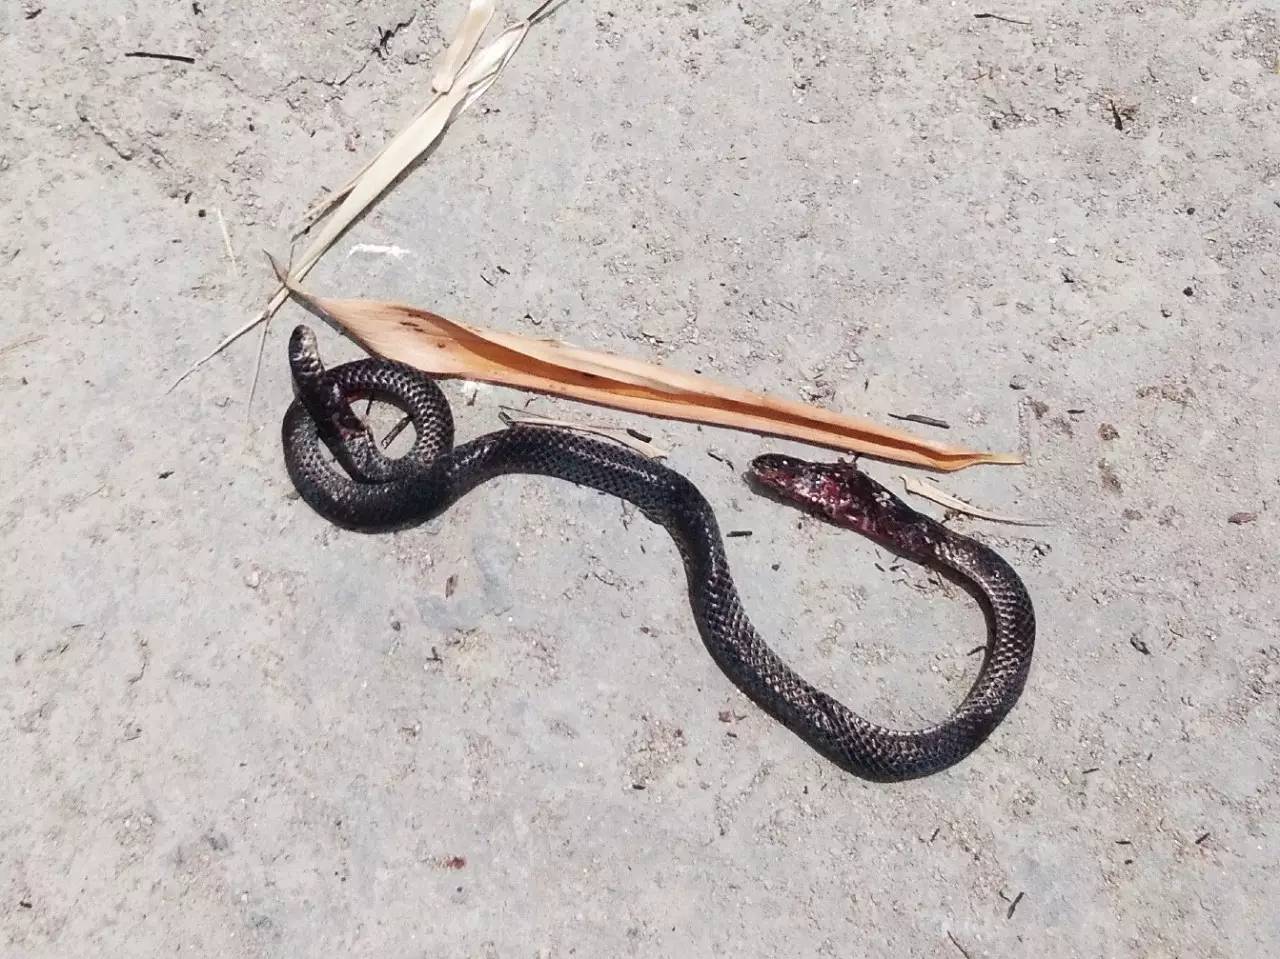 Extraordinary videos show a rare two-headed SNAKE discovered in a back ...